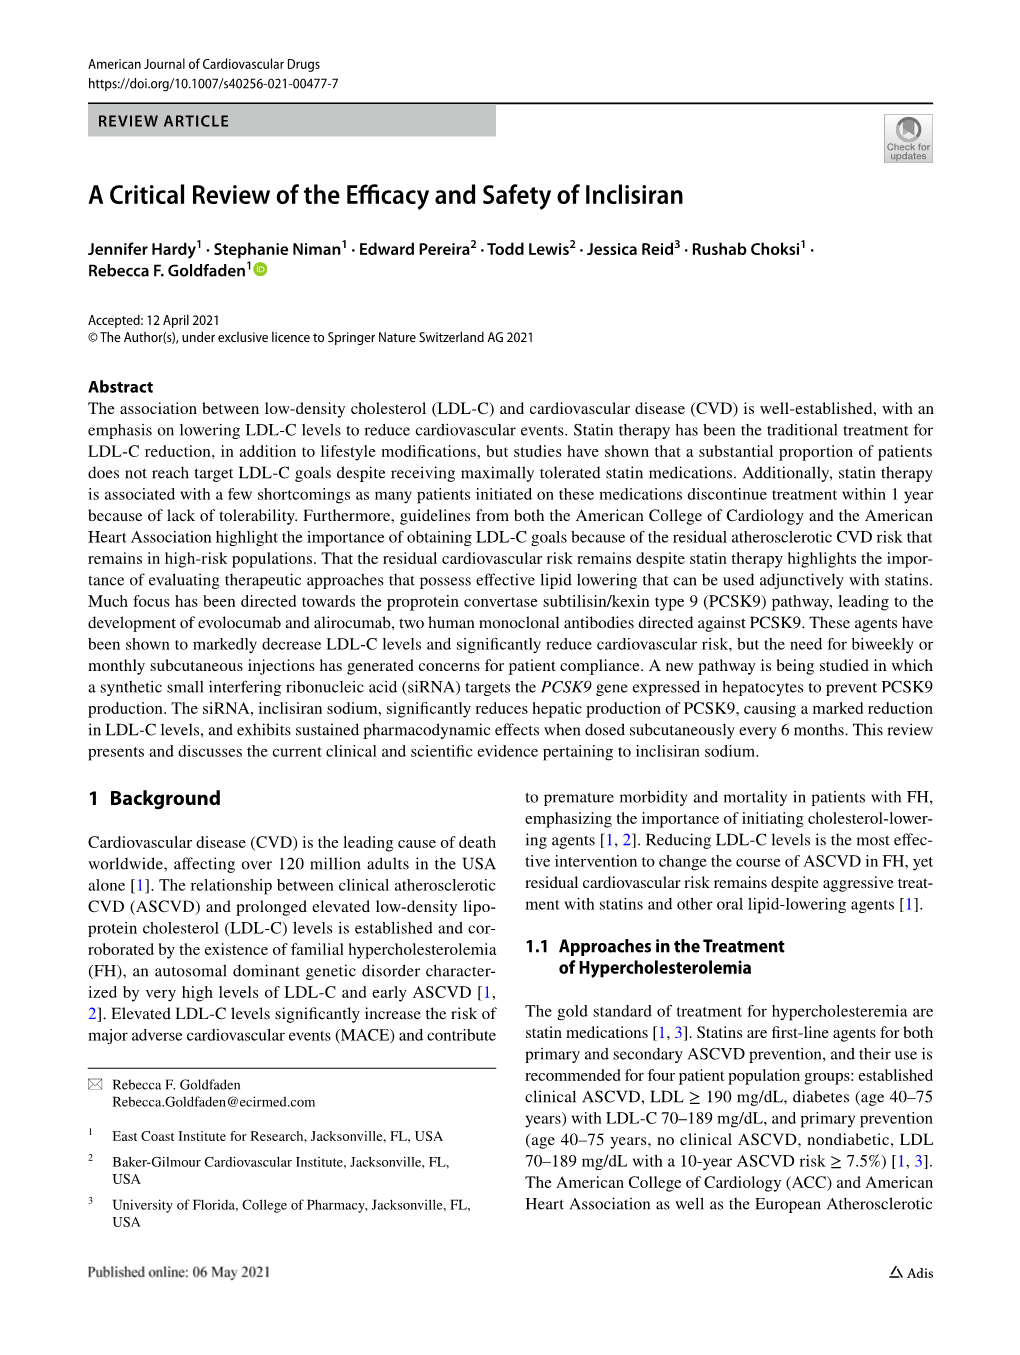 A Critical Review of the Efficacy and Safety of Inclisiran